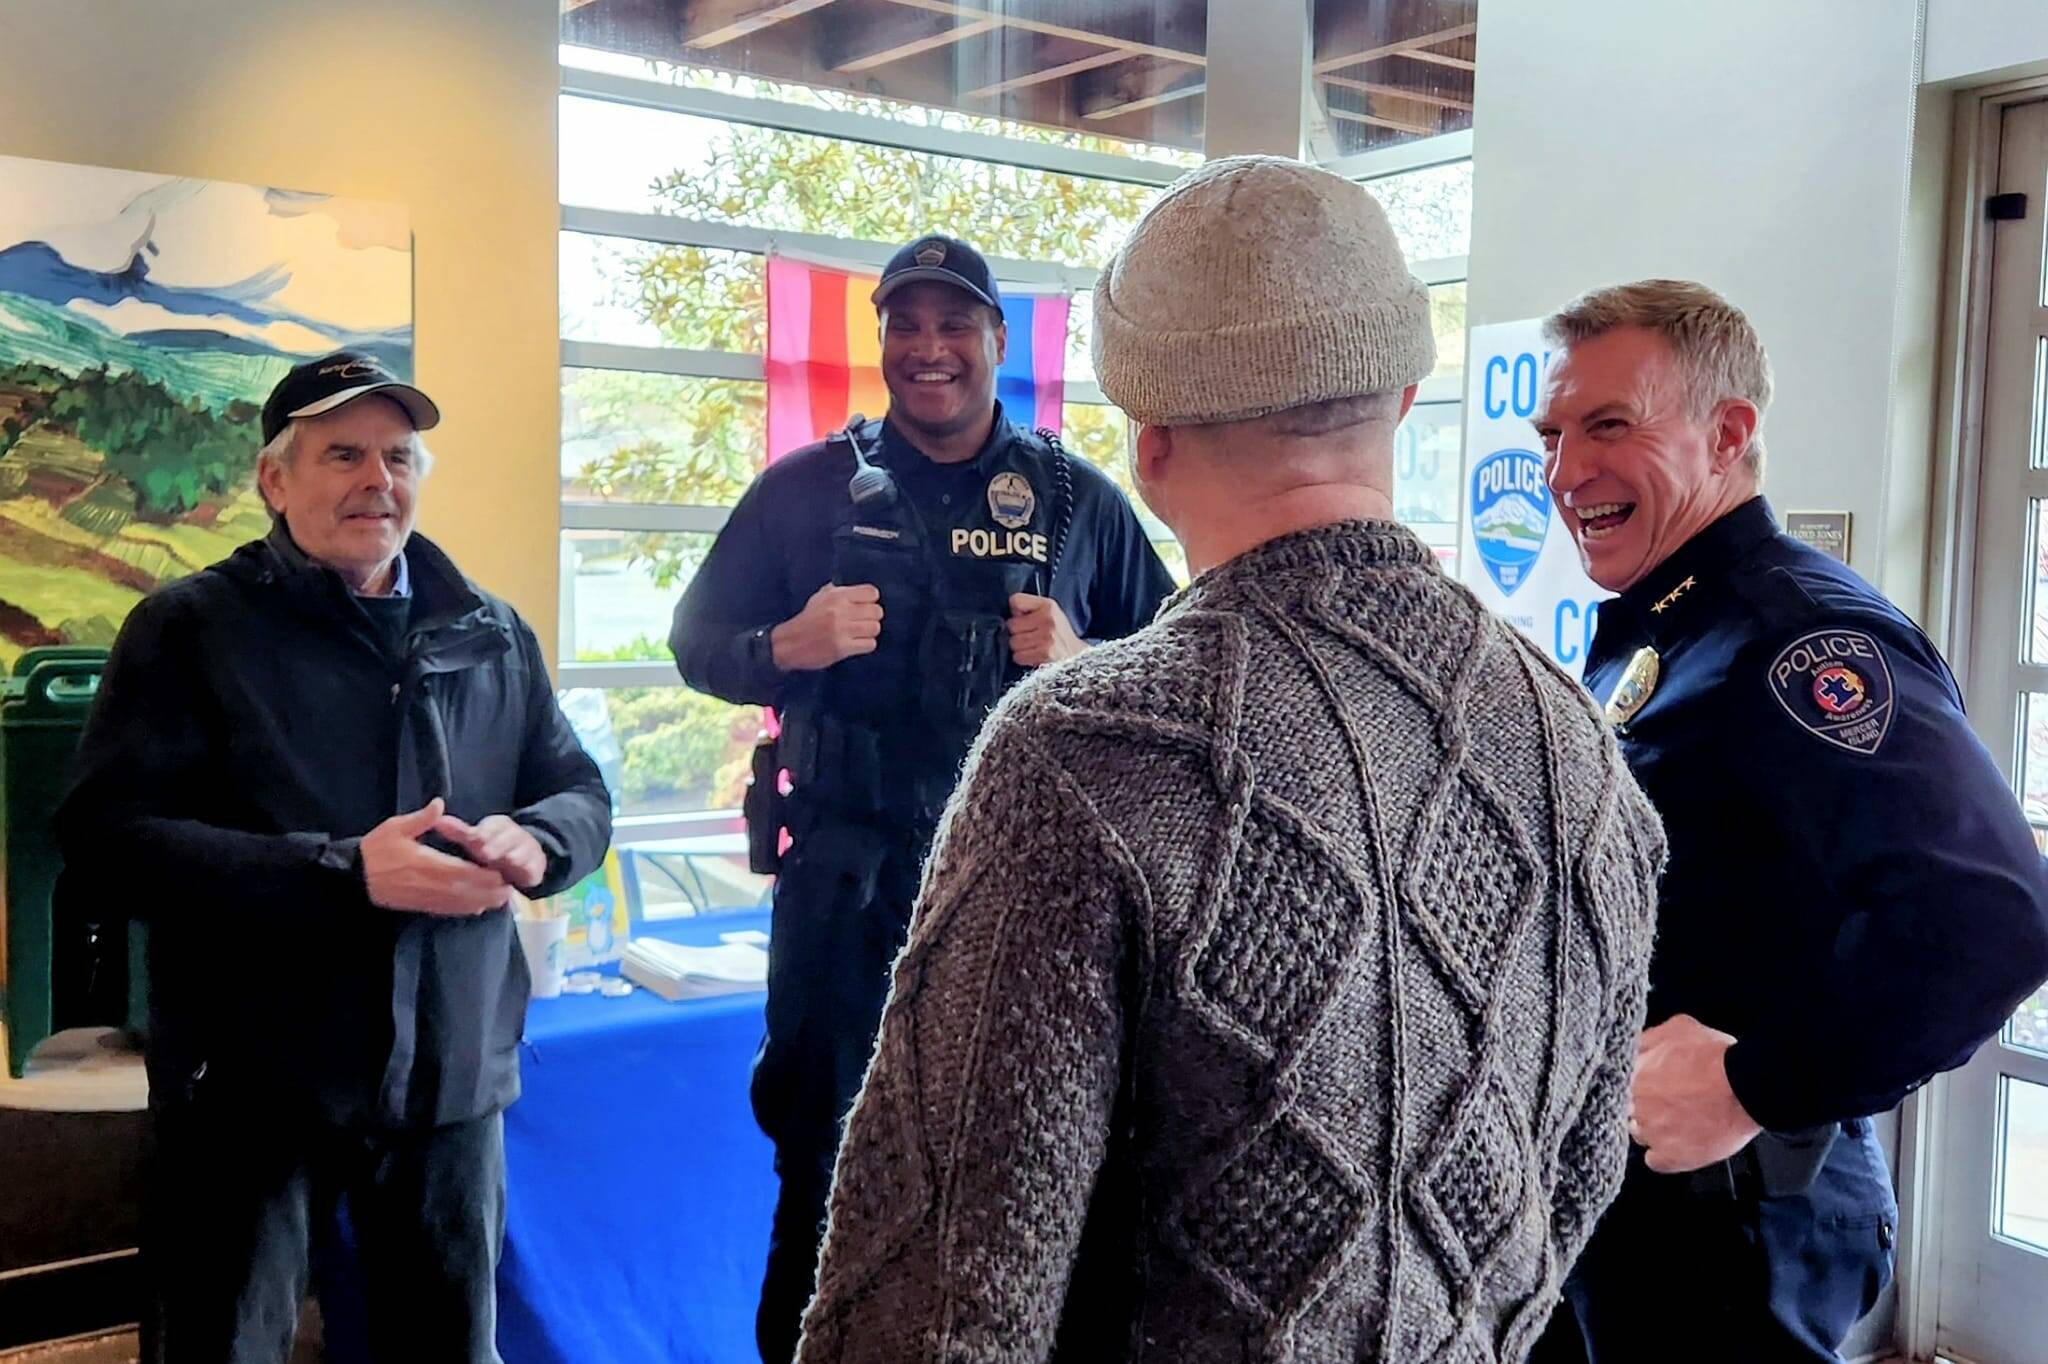 Mercer Island Police Department Chief Ed Holmes, right, and officer Kelly Robinson share a laugh with two residents at the April 10 Coffee With A Cop event at the north-end Starbucks. For the events, Robinson coordinates the venue and schedule and outreach materials. Photo courtesy of the Mercer Island Police Department